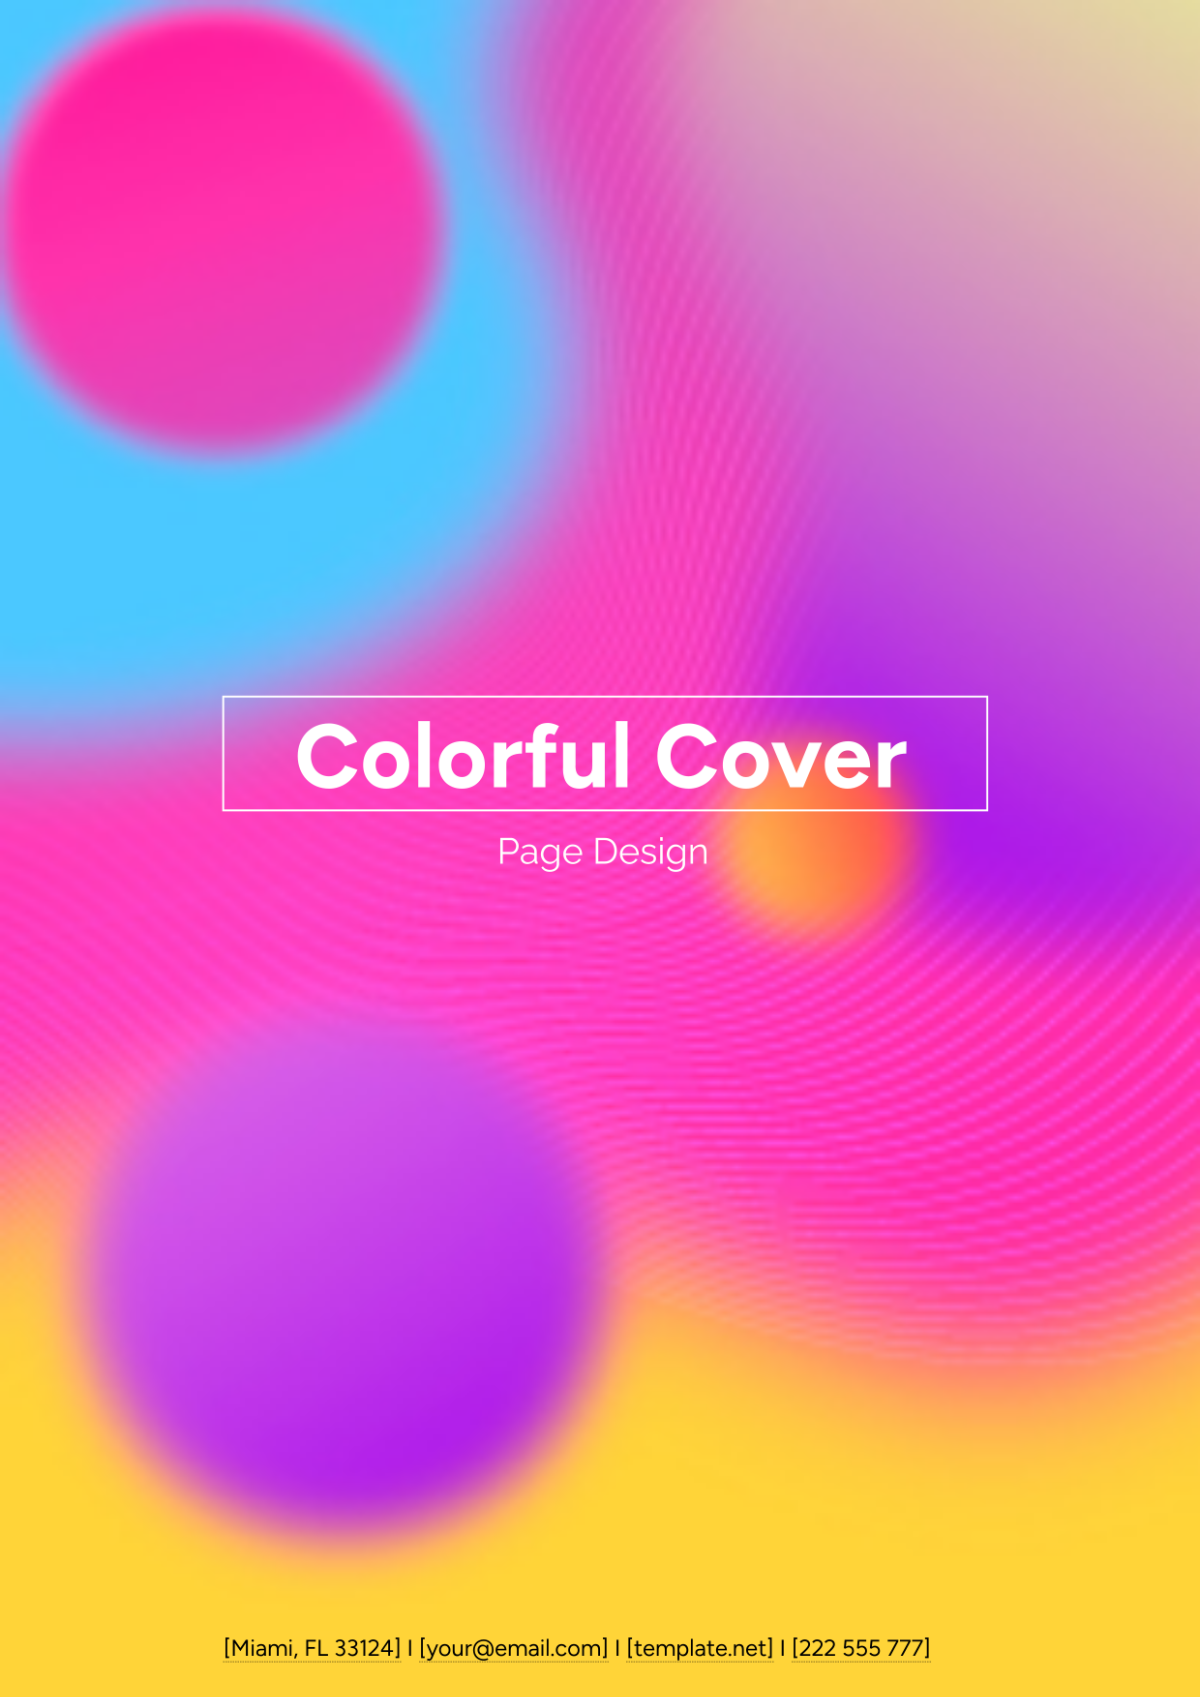 Free Colorful Cover Page Design Template